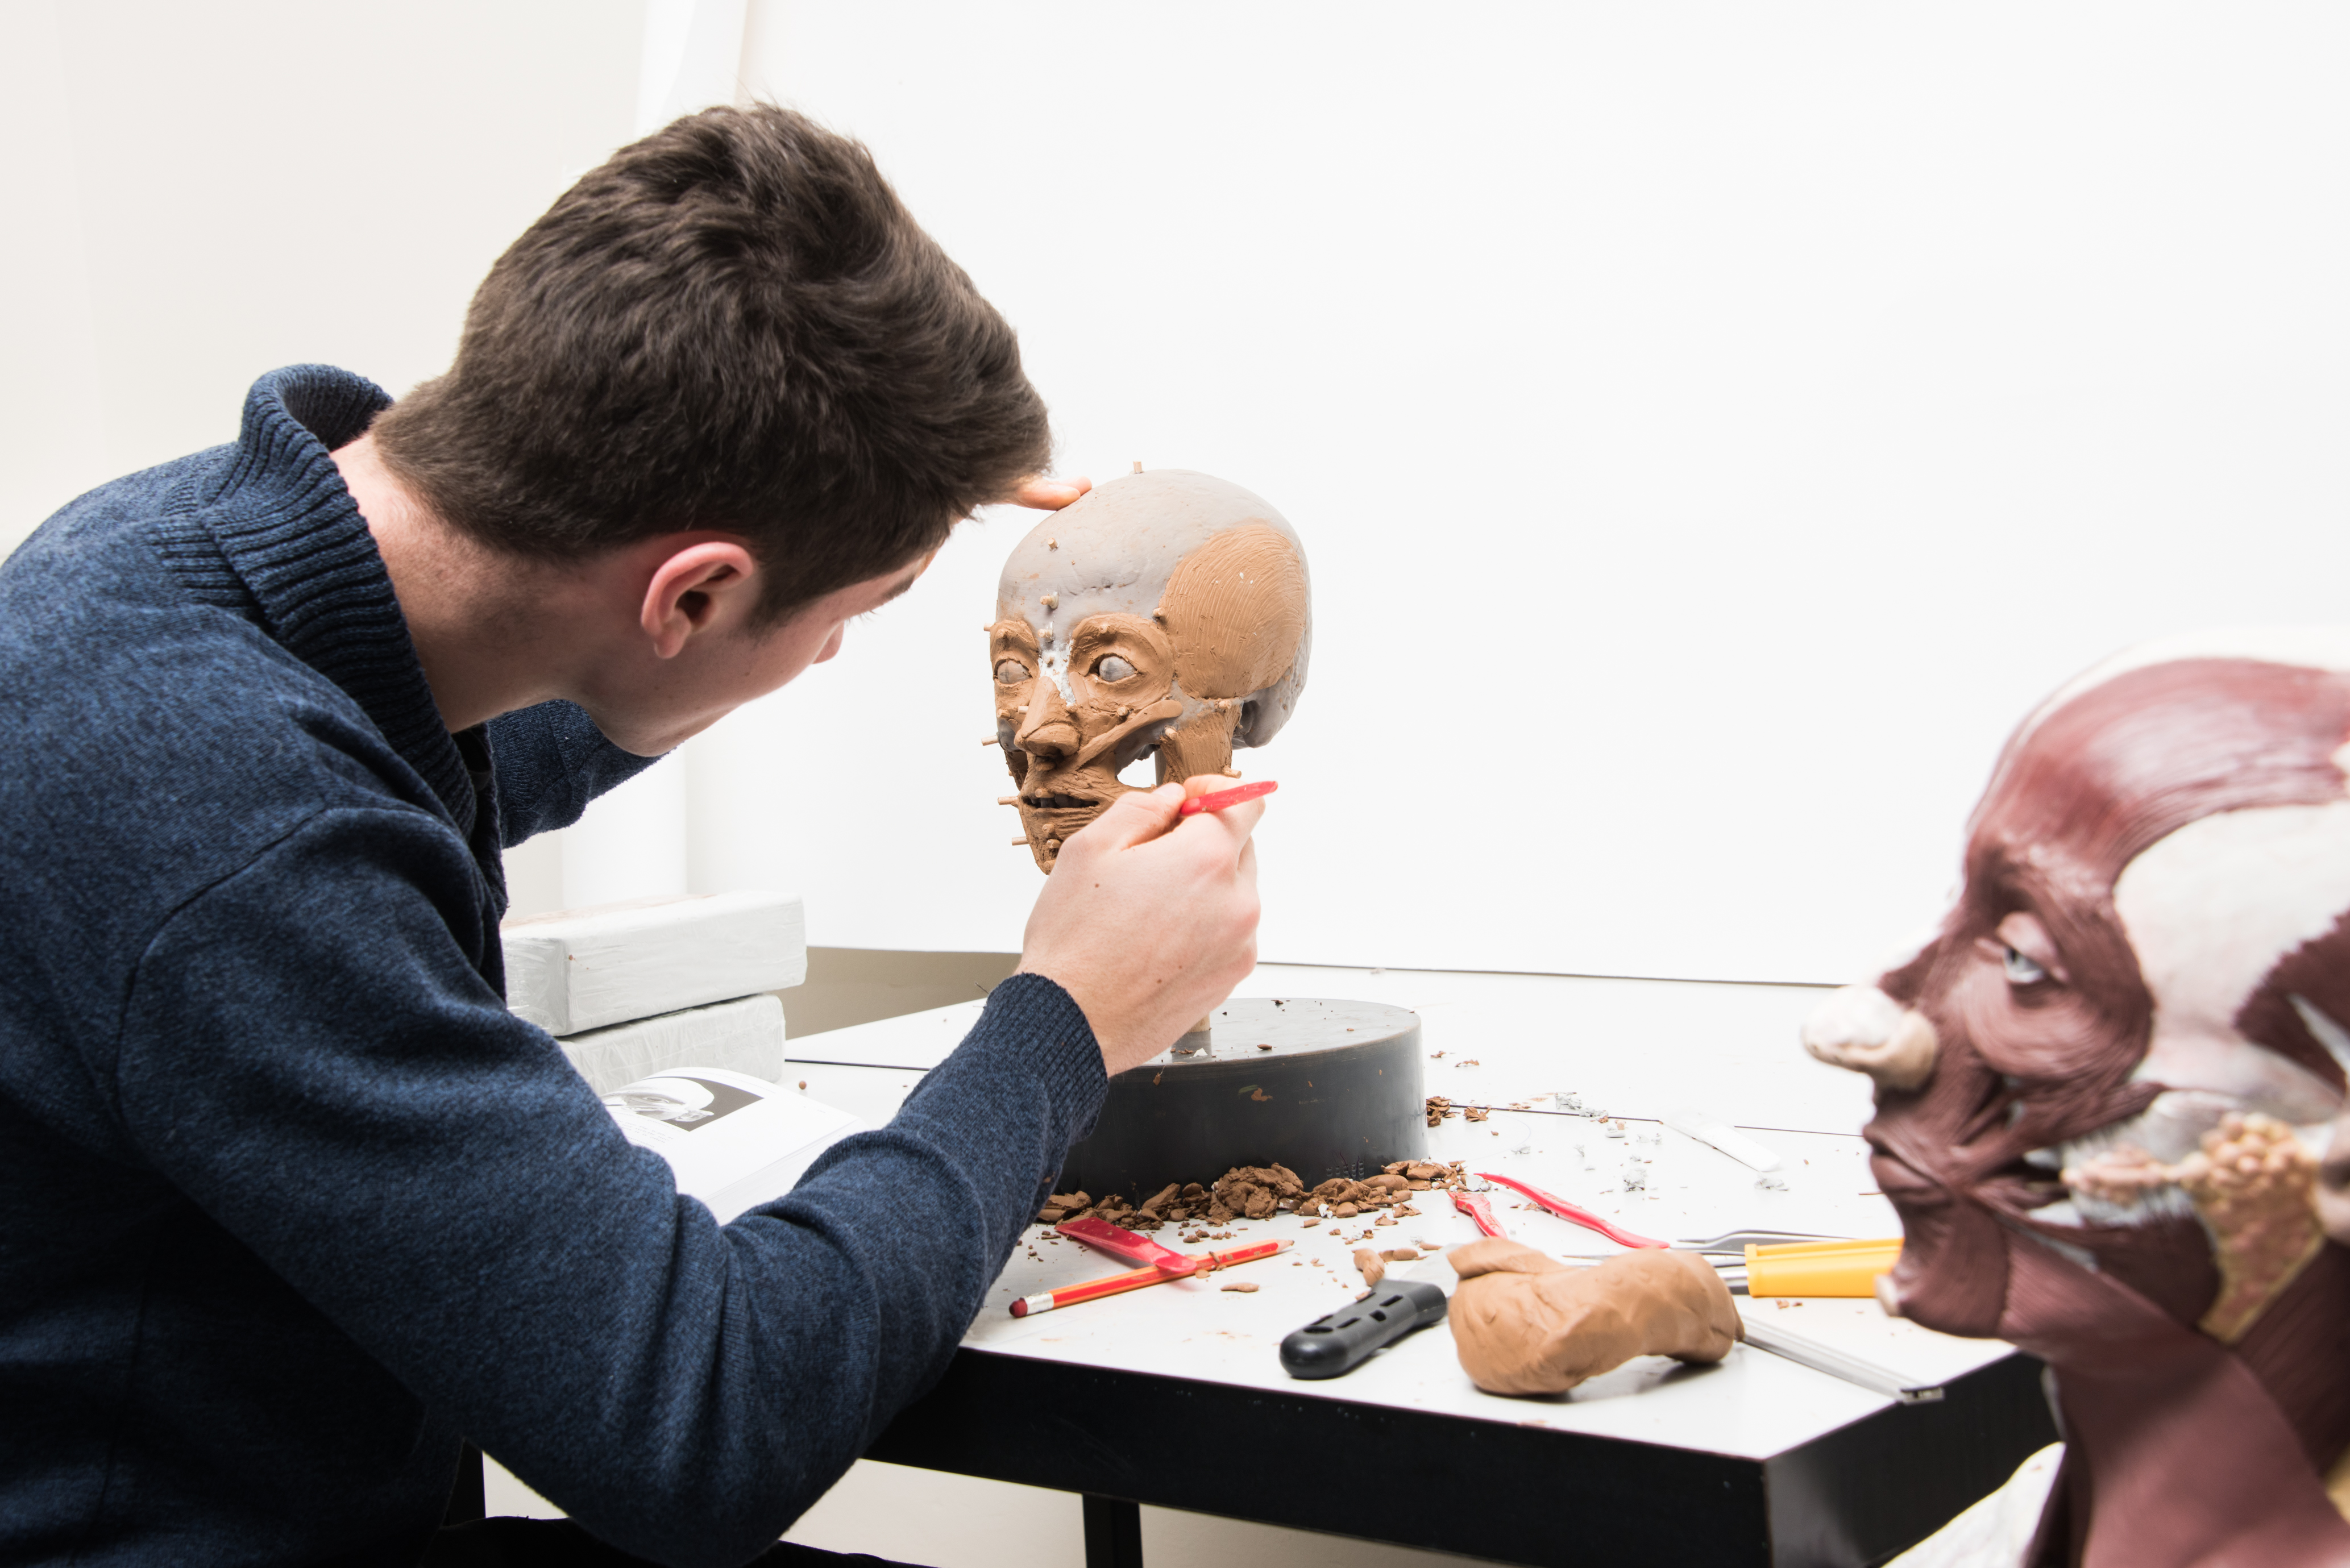 Paleopathology and Mummy Studies Group: Forensic facial reconstruction in an ongoing research project